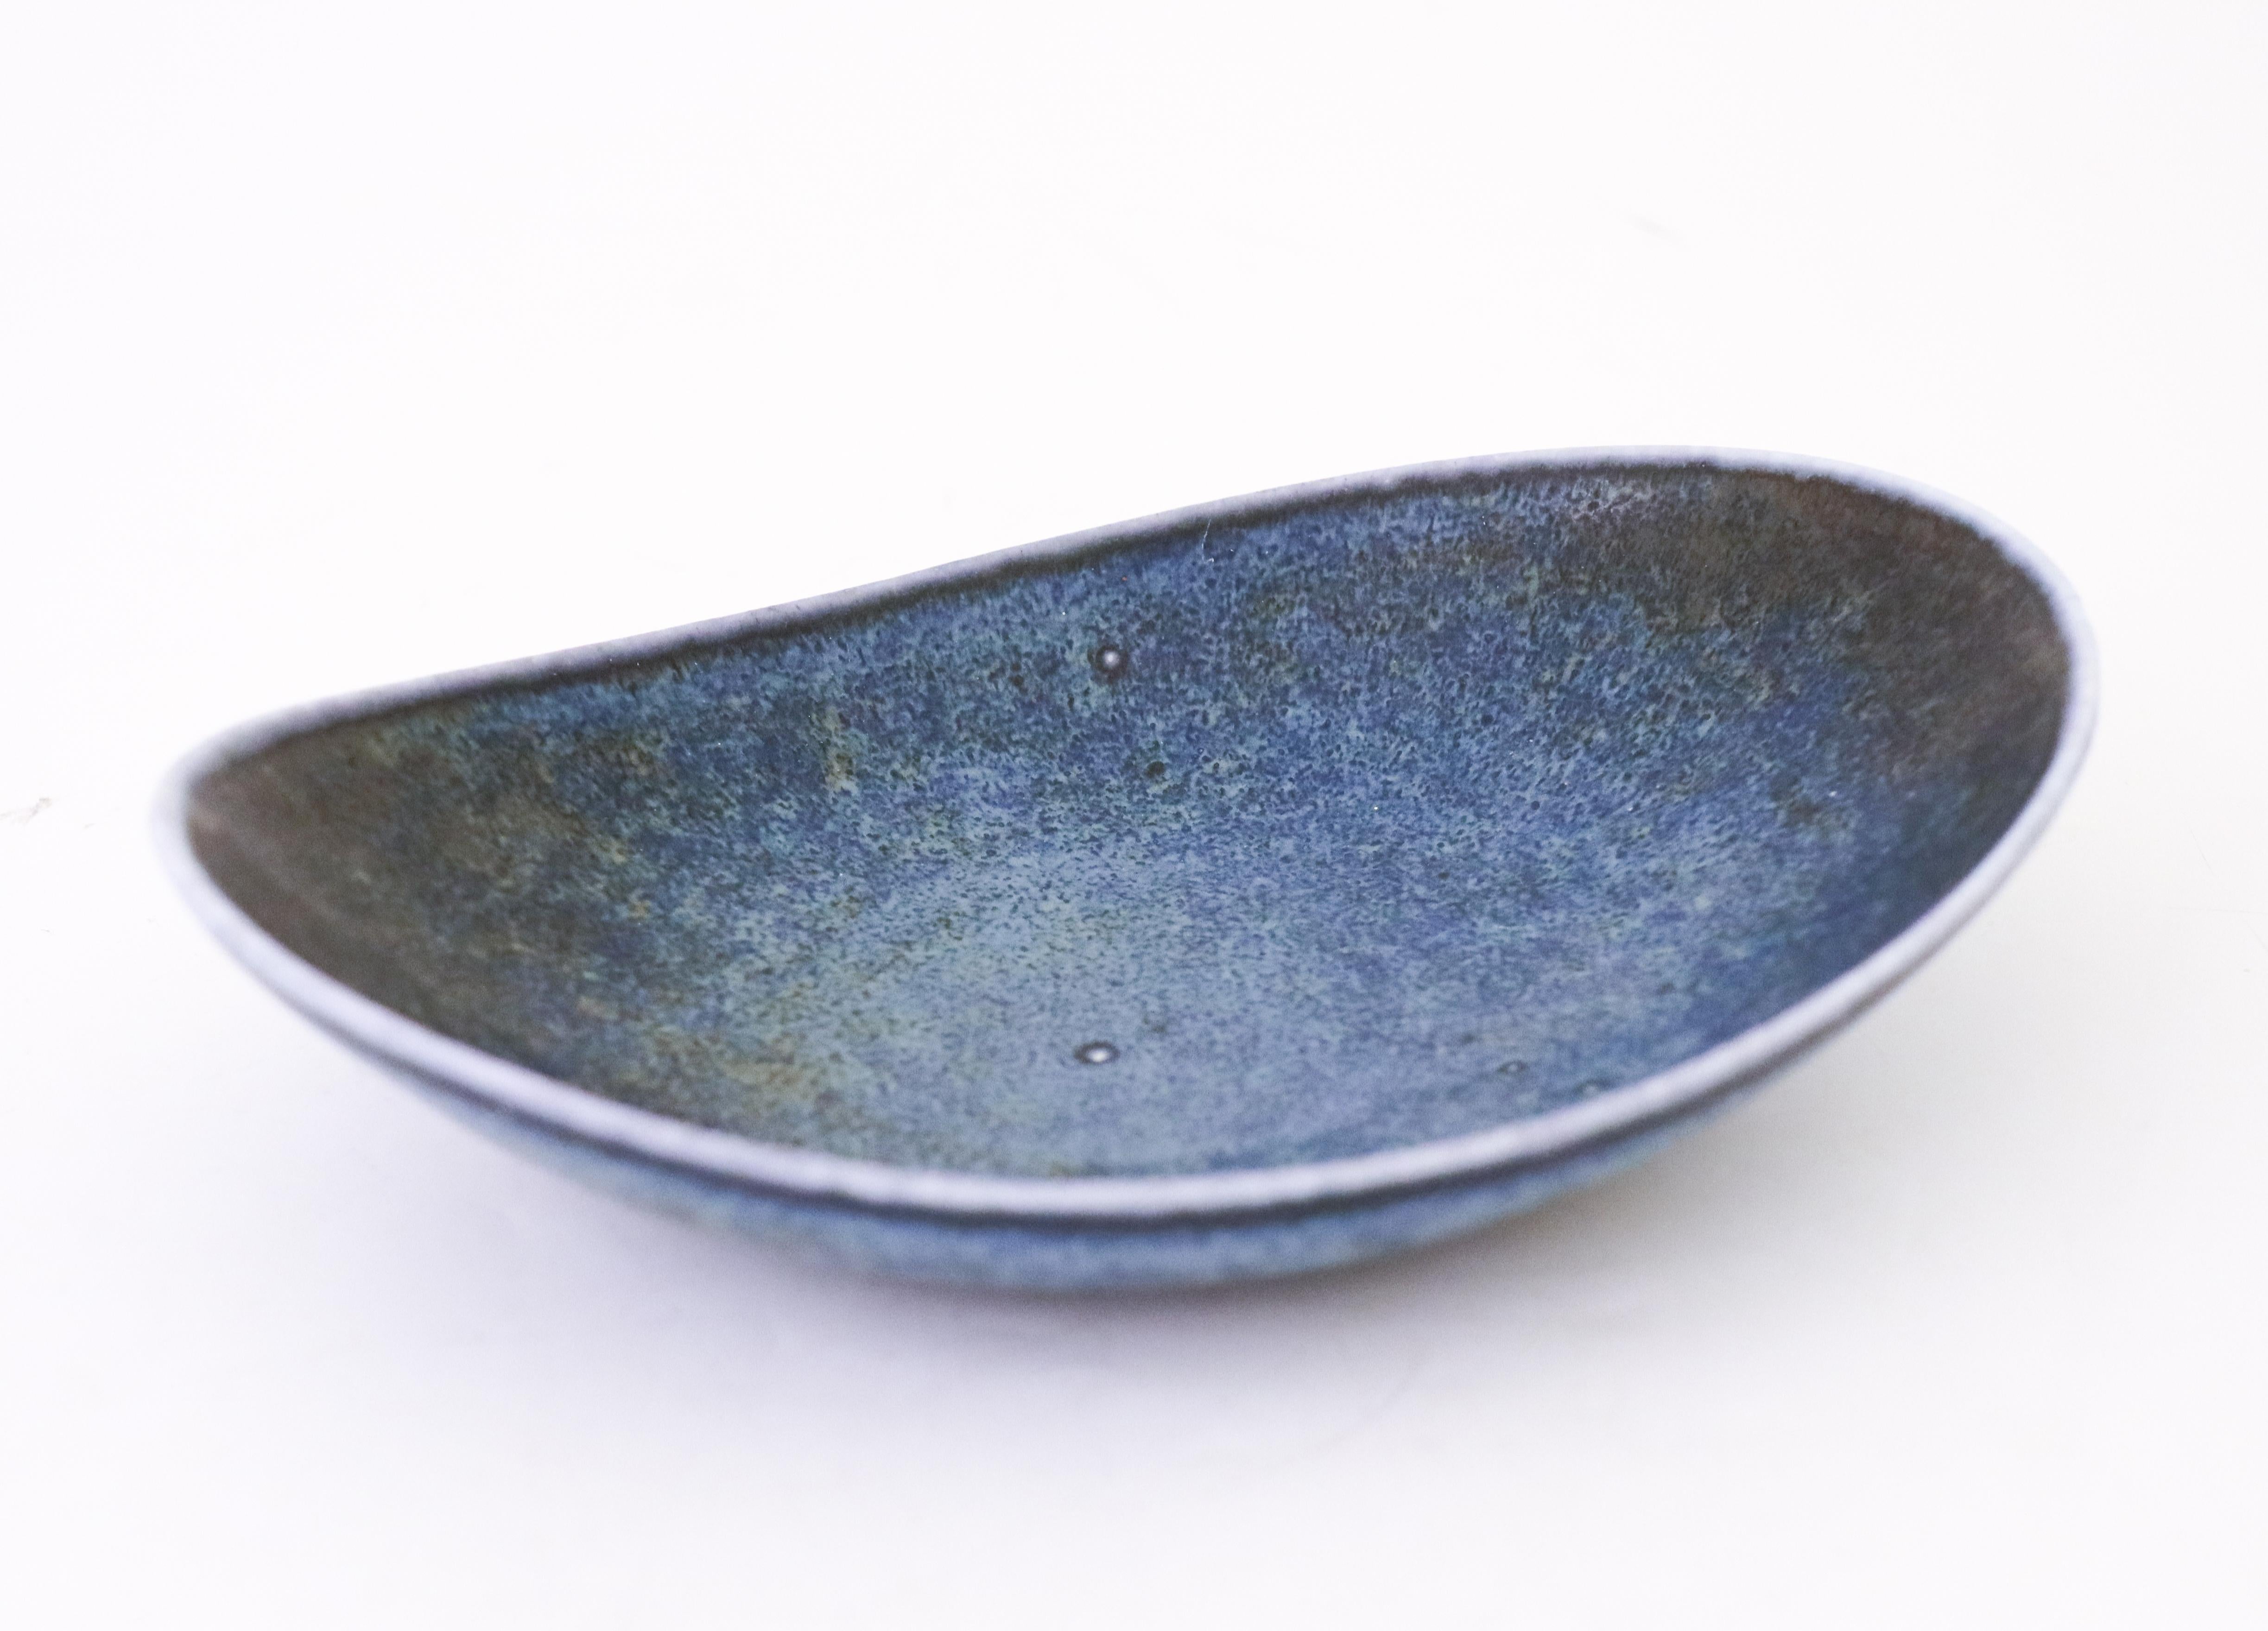 A lovely blue bowl designed by Carl-Harry Stålhane at Rörstrand, the bowl is 19 x 13.5 cm in diameter. It is in excellent condition except from some minor marks on the inside. The bowl is marked as 1st quality. 

Carl-Harry Stålhane is one of the